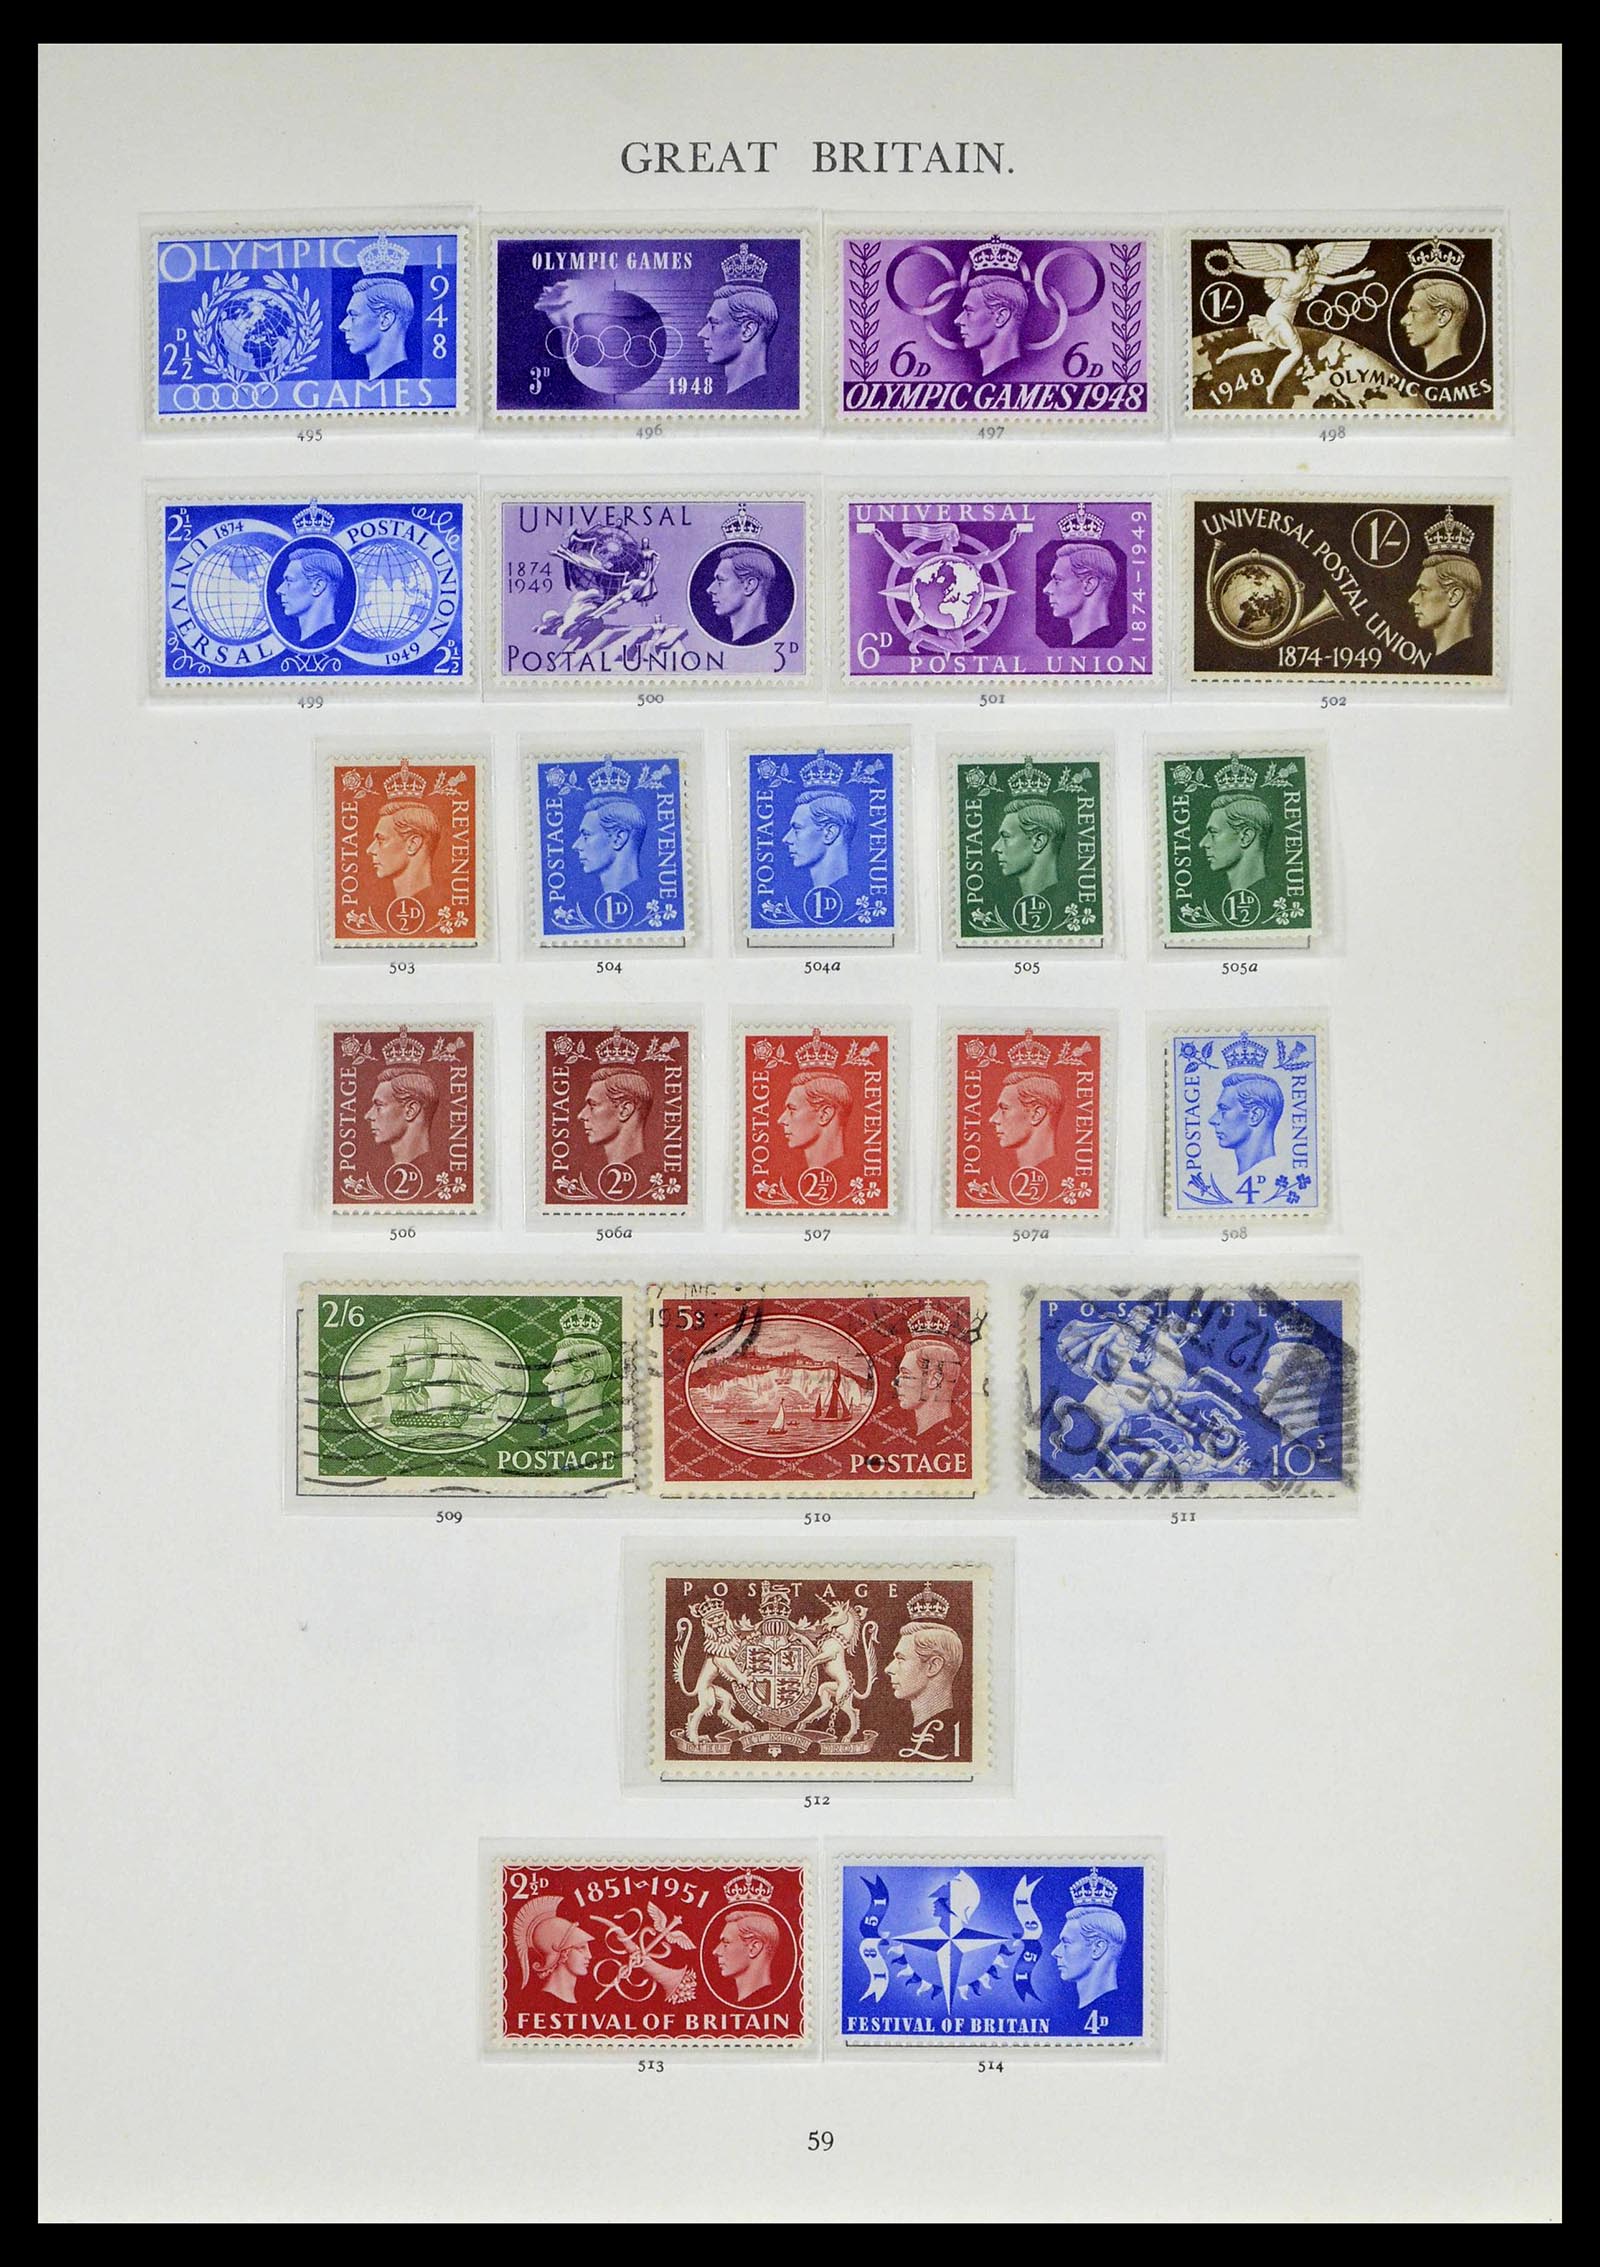 39025 0026 - Stamp collection 39025 Great Britain specialised 1840-1990.